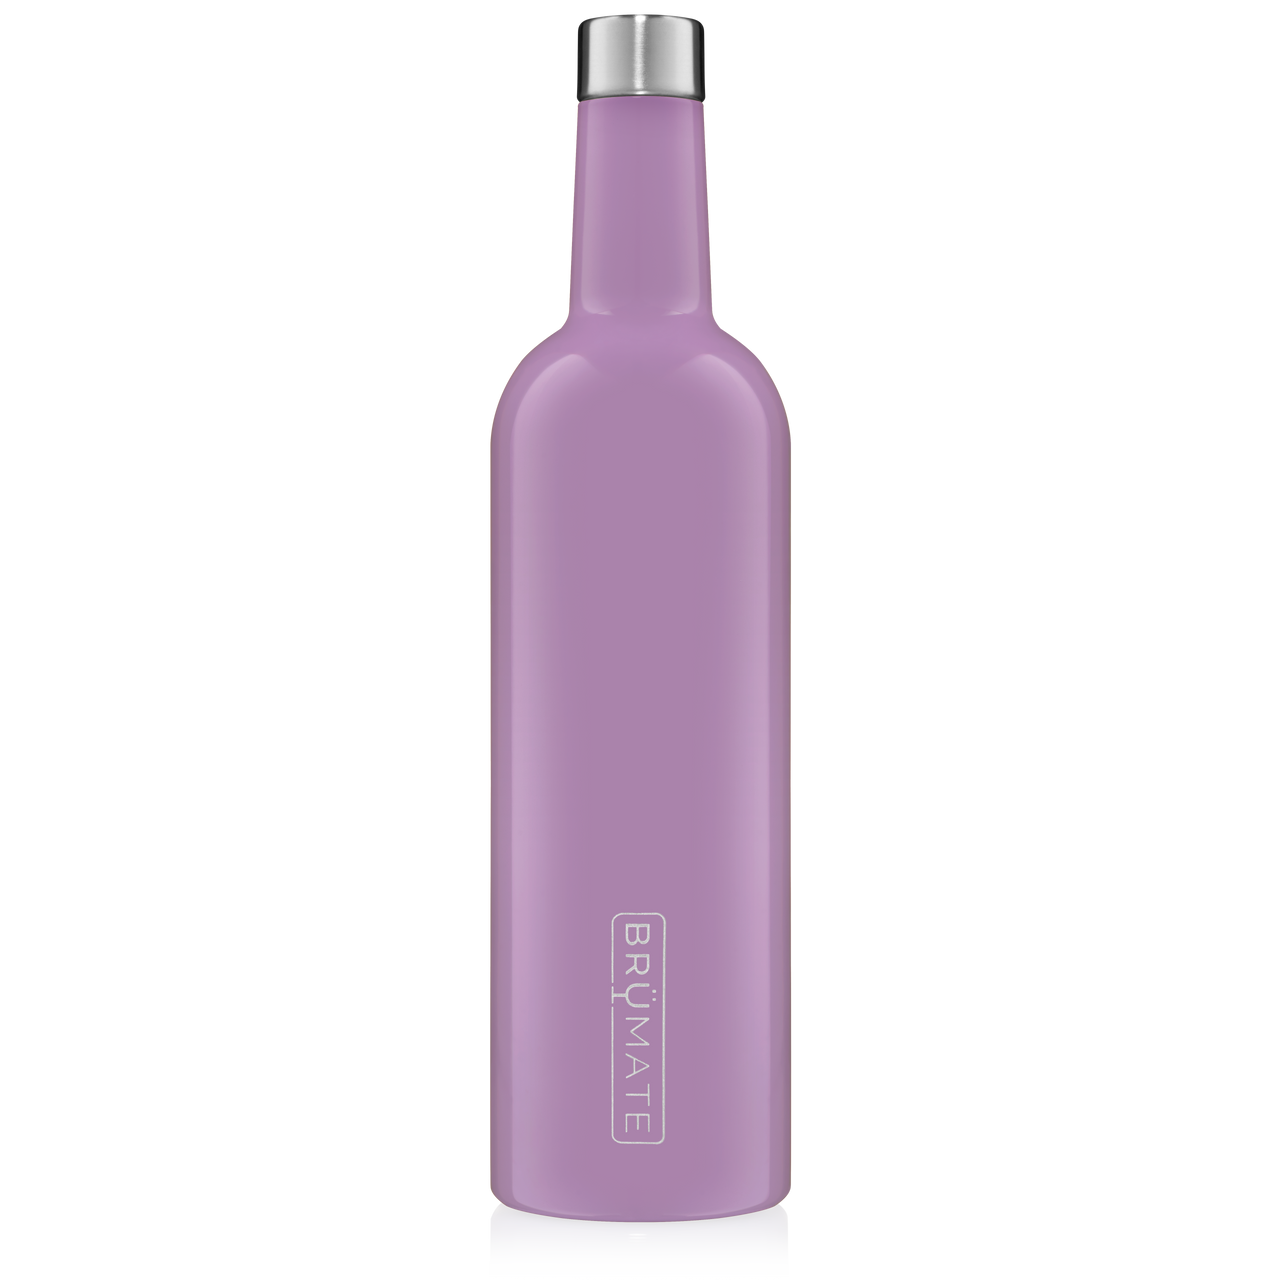 https://cdn10.bigcommerce.com/s-4563qp/products/14711/images/35233/Winesulator-Violet-WL750__38776.1618862177.1280.1280.png?c=2